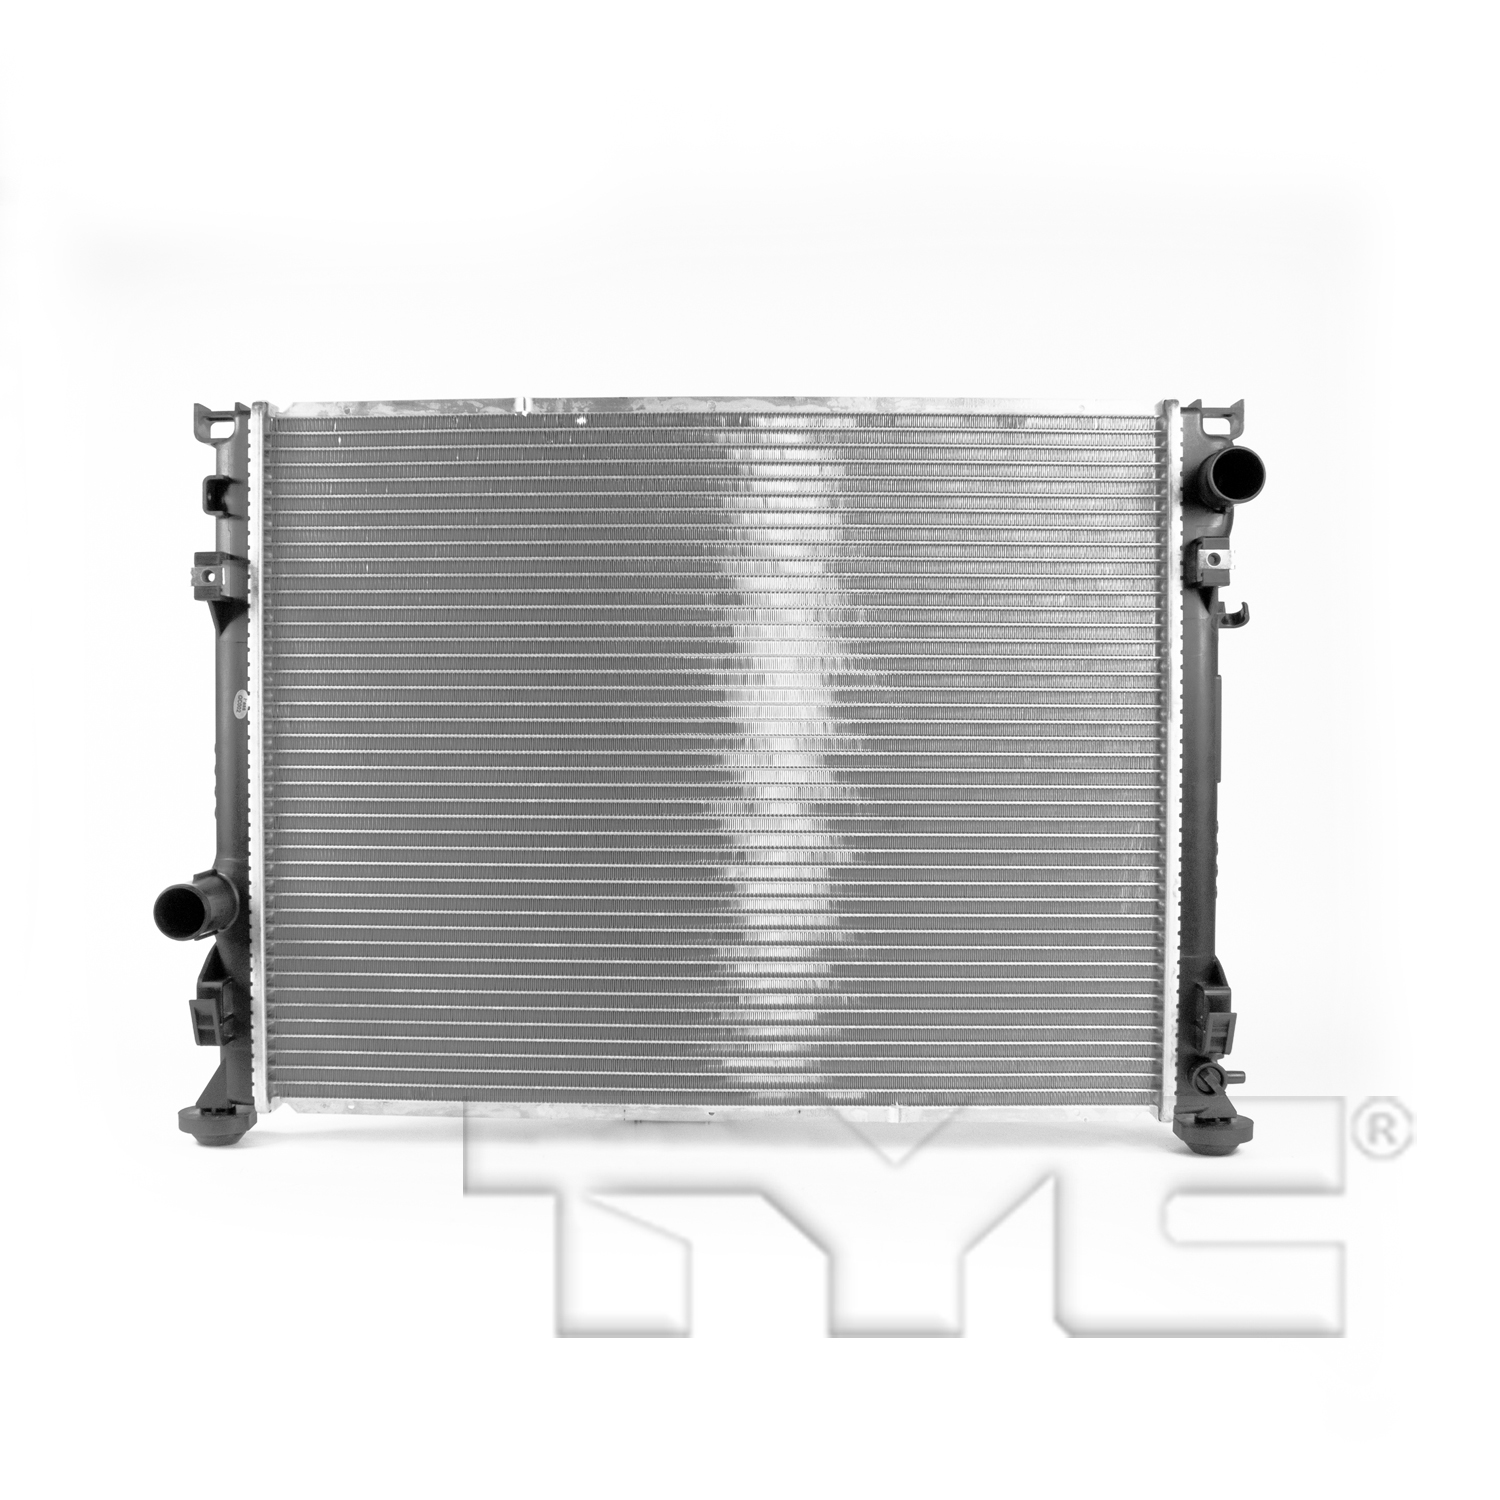 Aftermarket RADIATORS for DODGE - CHARGER, CHARGER,06-10,Radiator assembly